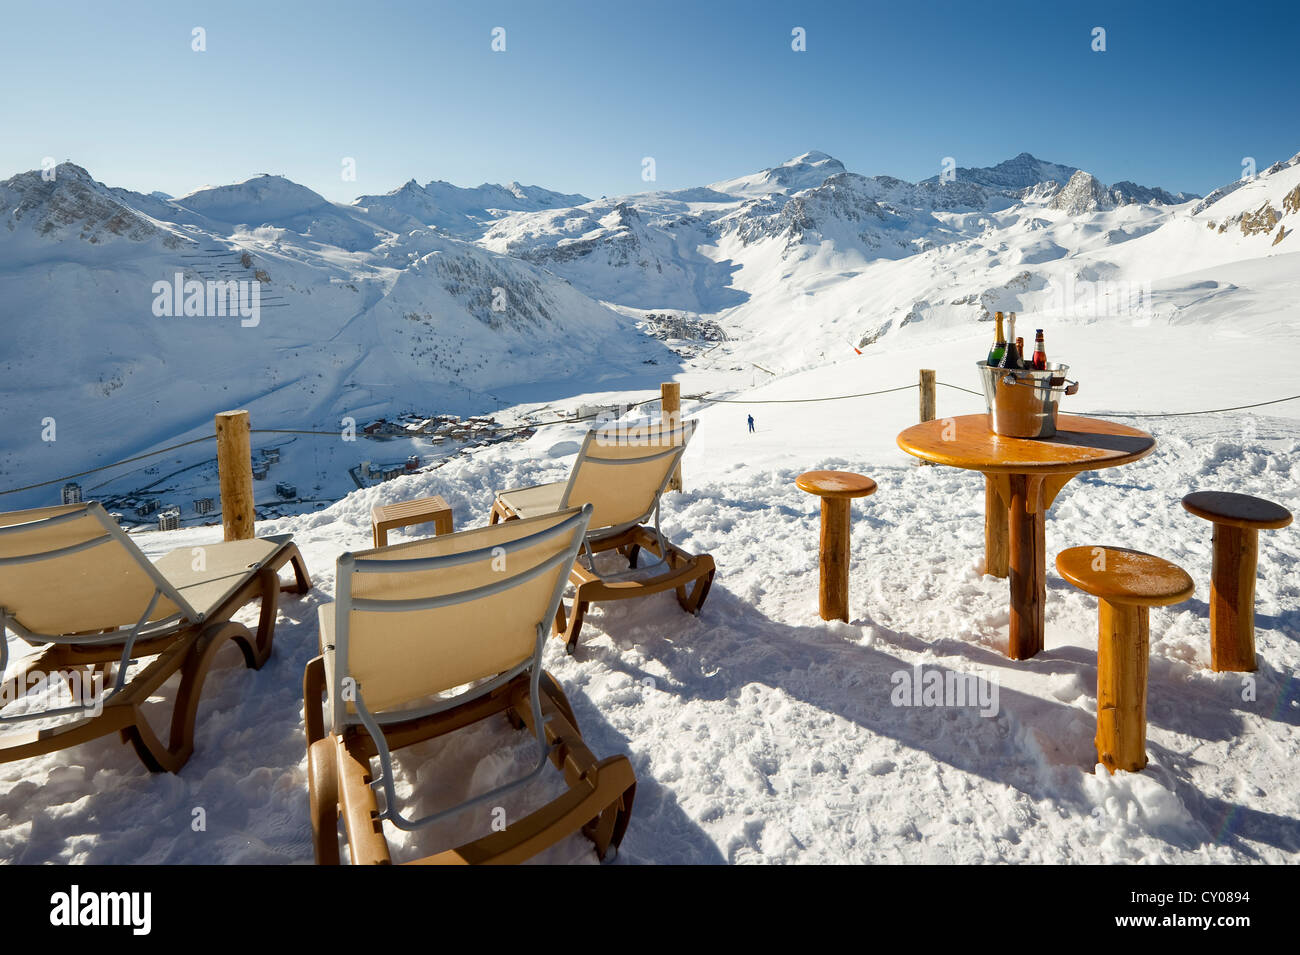 Champagne bottle in a bar, snow-covered mountain landscape, Tignes, Val d'Isere, Savoie, Alps, France, Europe Stock Photo